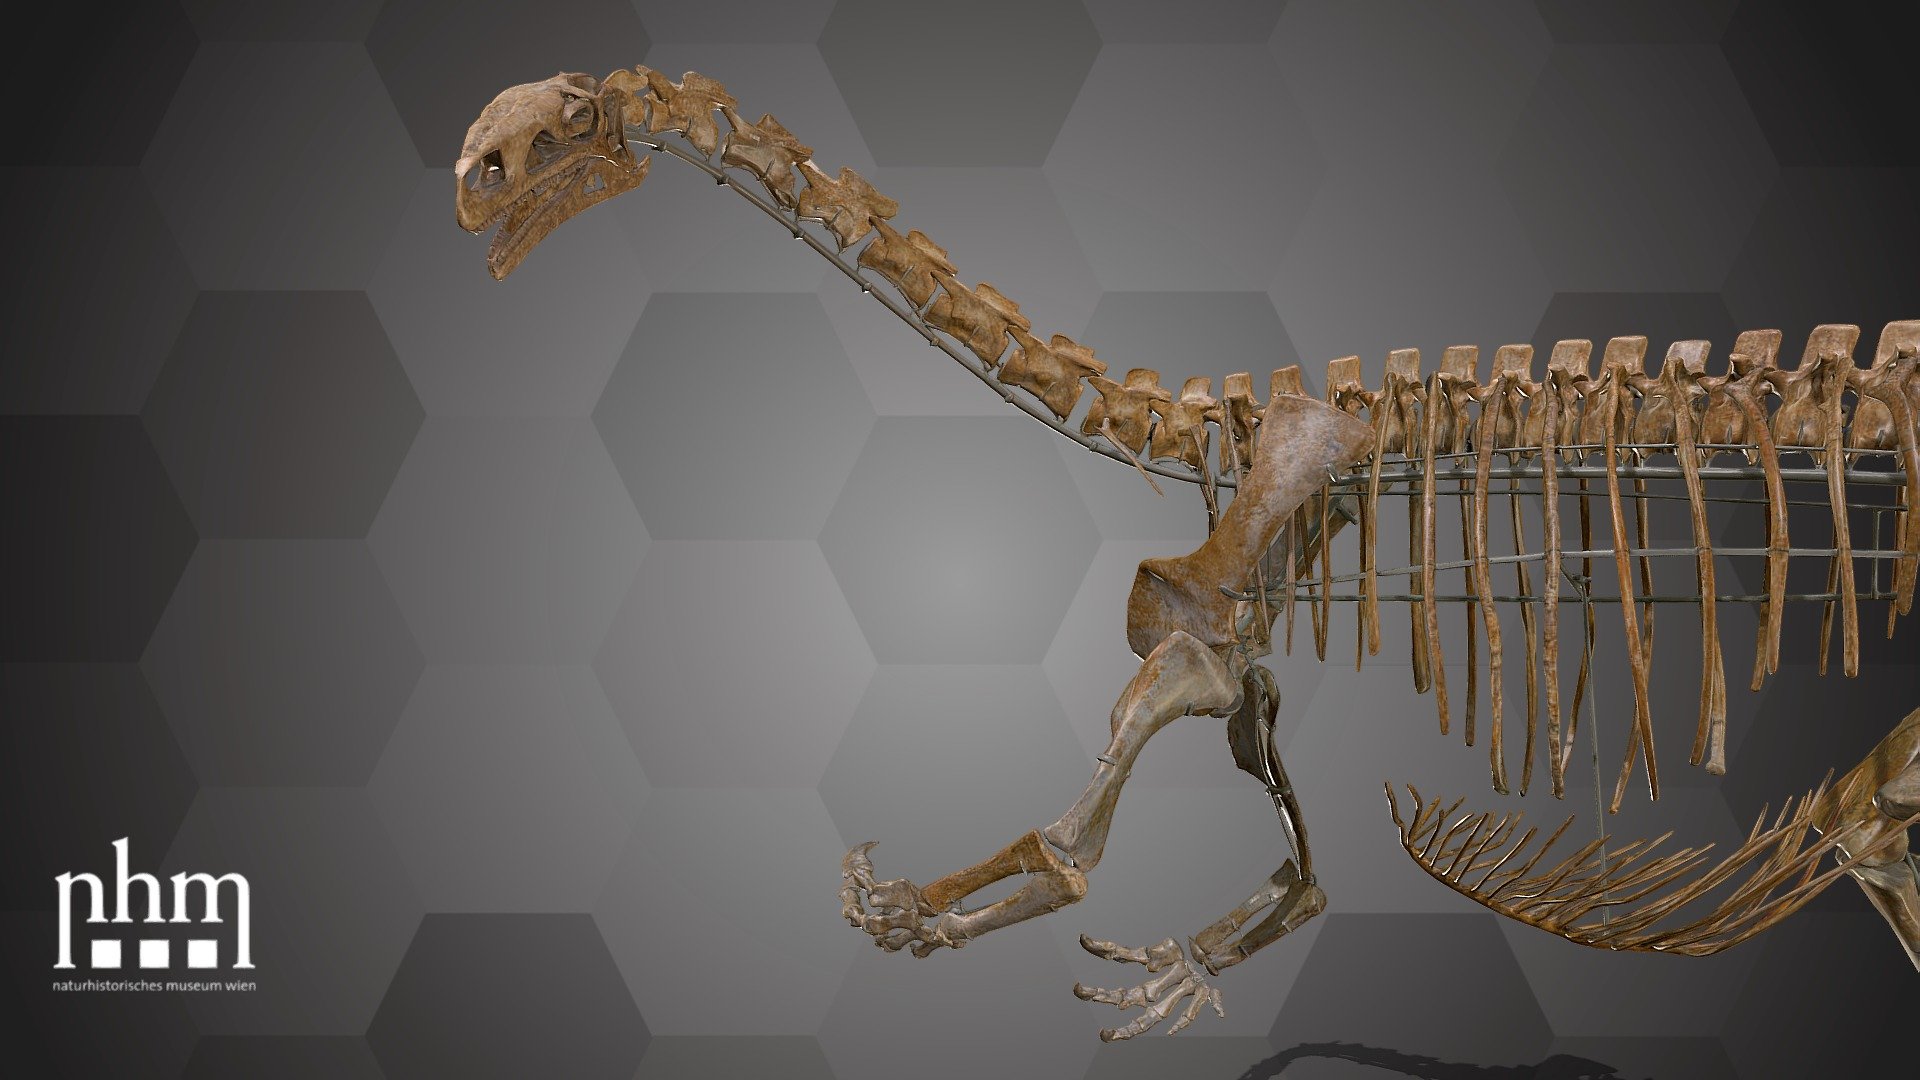 3D scan of a Plateosaurus (Plateosaurus trossingensis) skeleton. Plateosaurus trossingensis was an herbivore, “prosauropod” dinosaur with a small skull but a long neck and tail. This skeleton consists of original bones, as well as 3D print-reconstructions; details can be seen in the graphic below. 


© NHMW

The skeleton is on display in Hall 7 of the NHM Vienna.

Species: Plateosaurus trossingensis Fraas, 1913 

Collection: Natural History Museum Vienna, Geology &amp; Paleontology Dept., Vertebrate Coll. (curator: Ursula Göhlich) – Permanent loan from the Dinosaur Museum in Frick

Find out more about the NHMW here.

Scanned and edited by A.Festi, C.Guerin, A.Haider, P.Tranchet, V.Winkler (NHMW)

Scanner: Artec Leo. Infrastructure funded by the FFG 3d model